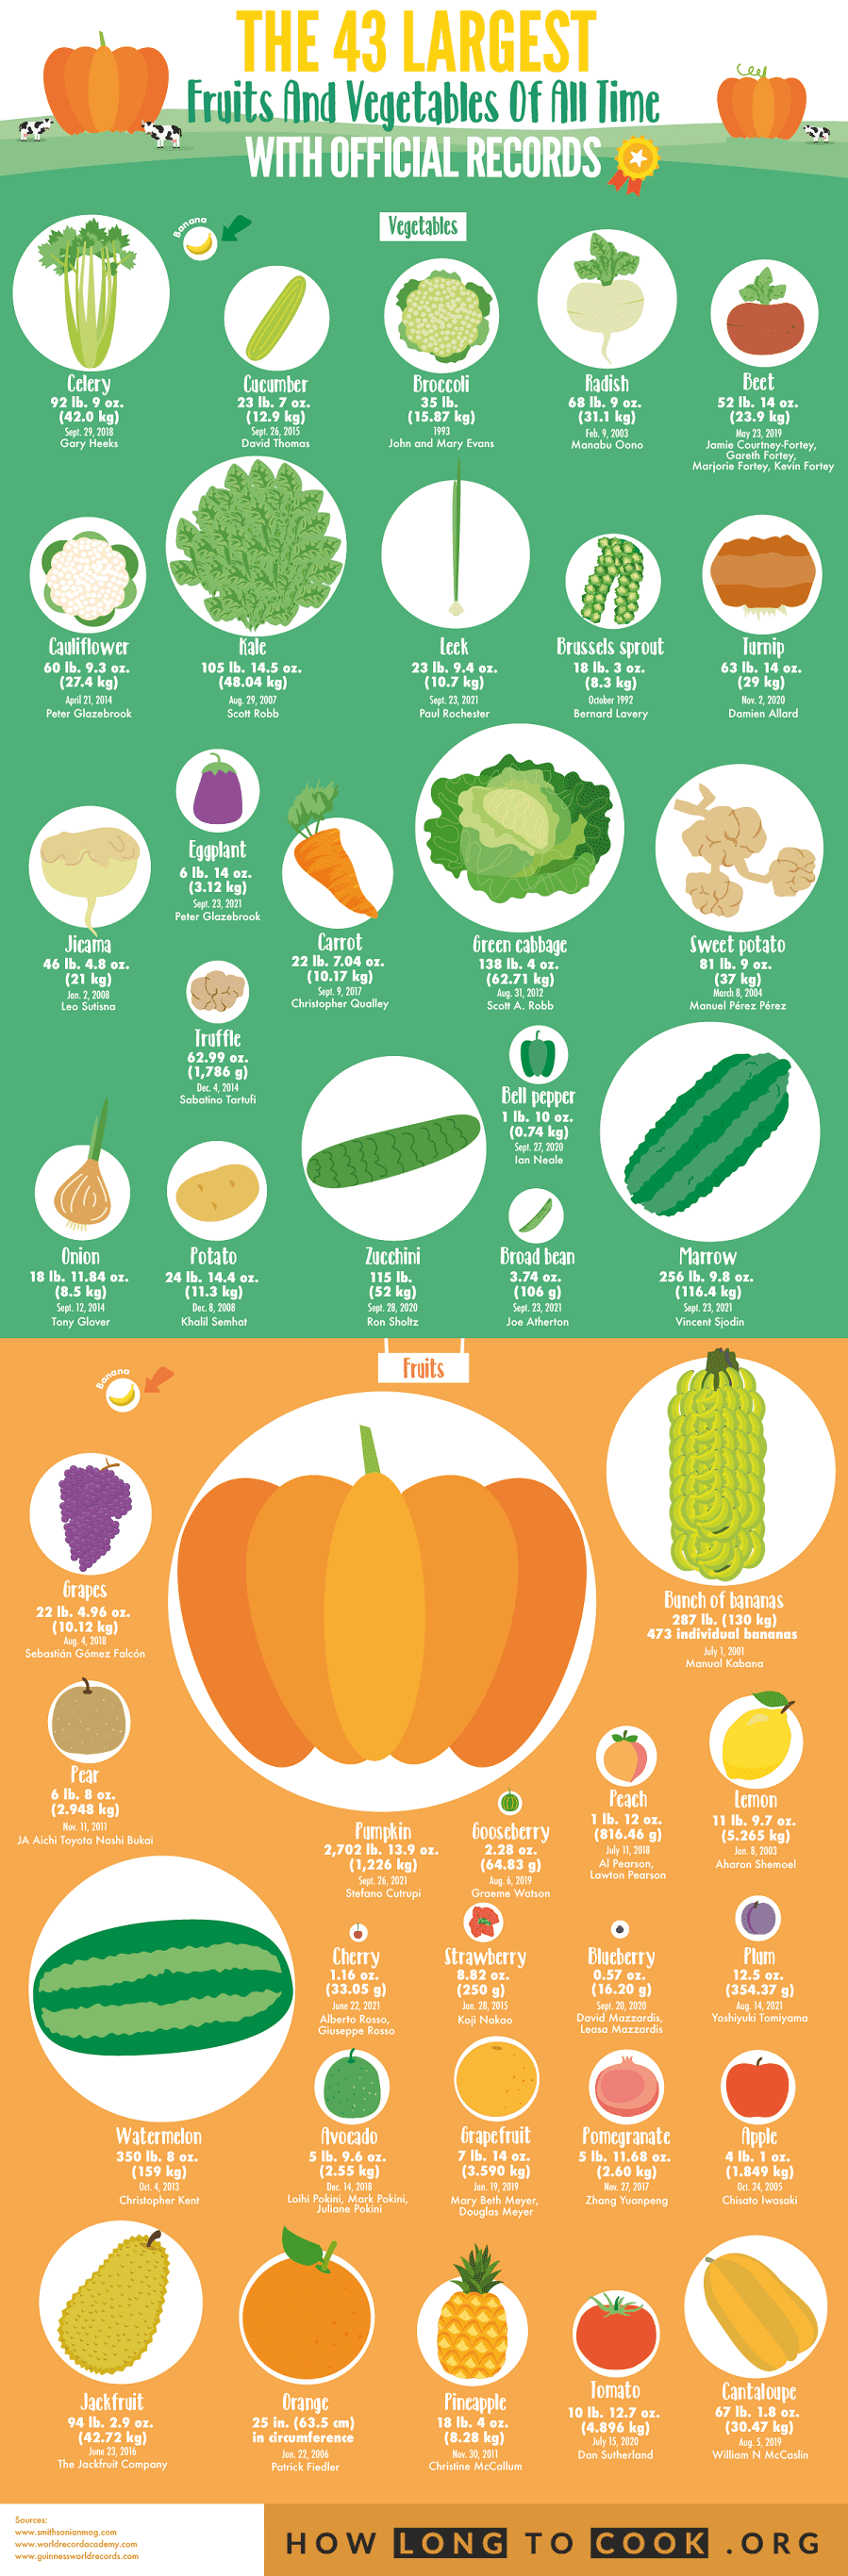 43-largest-fruits-vegetables-all-time-Infographic